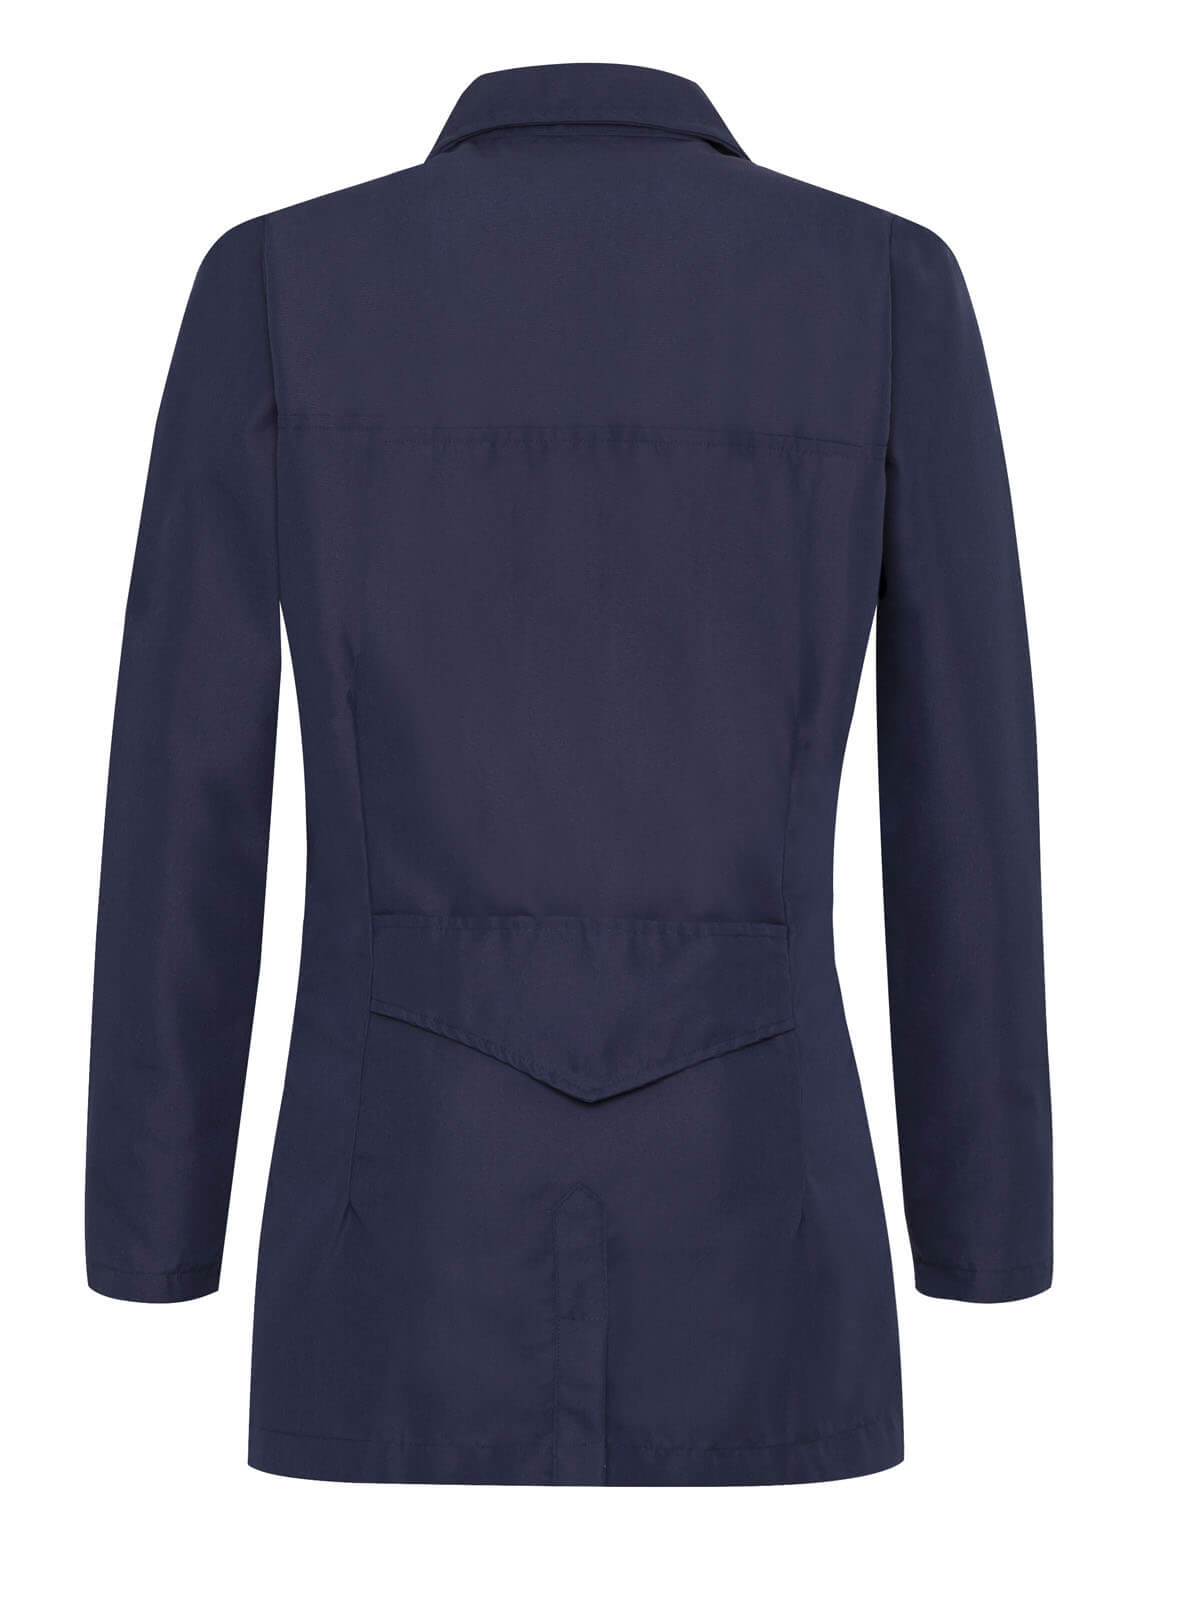 Navy blue medical gown